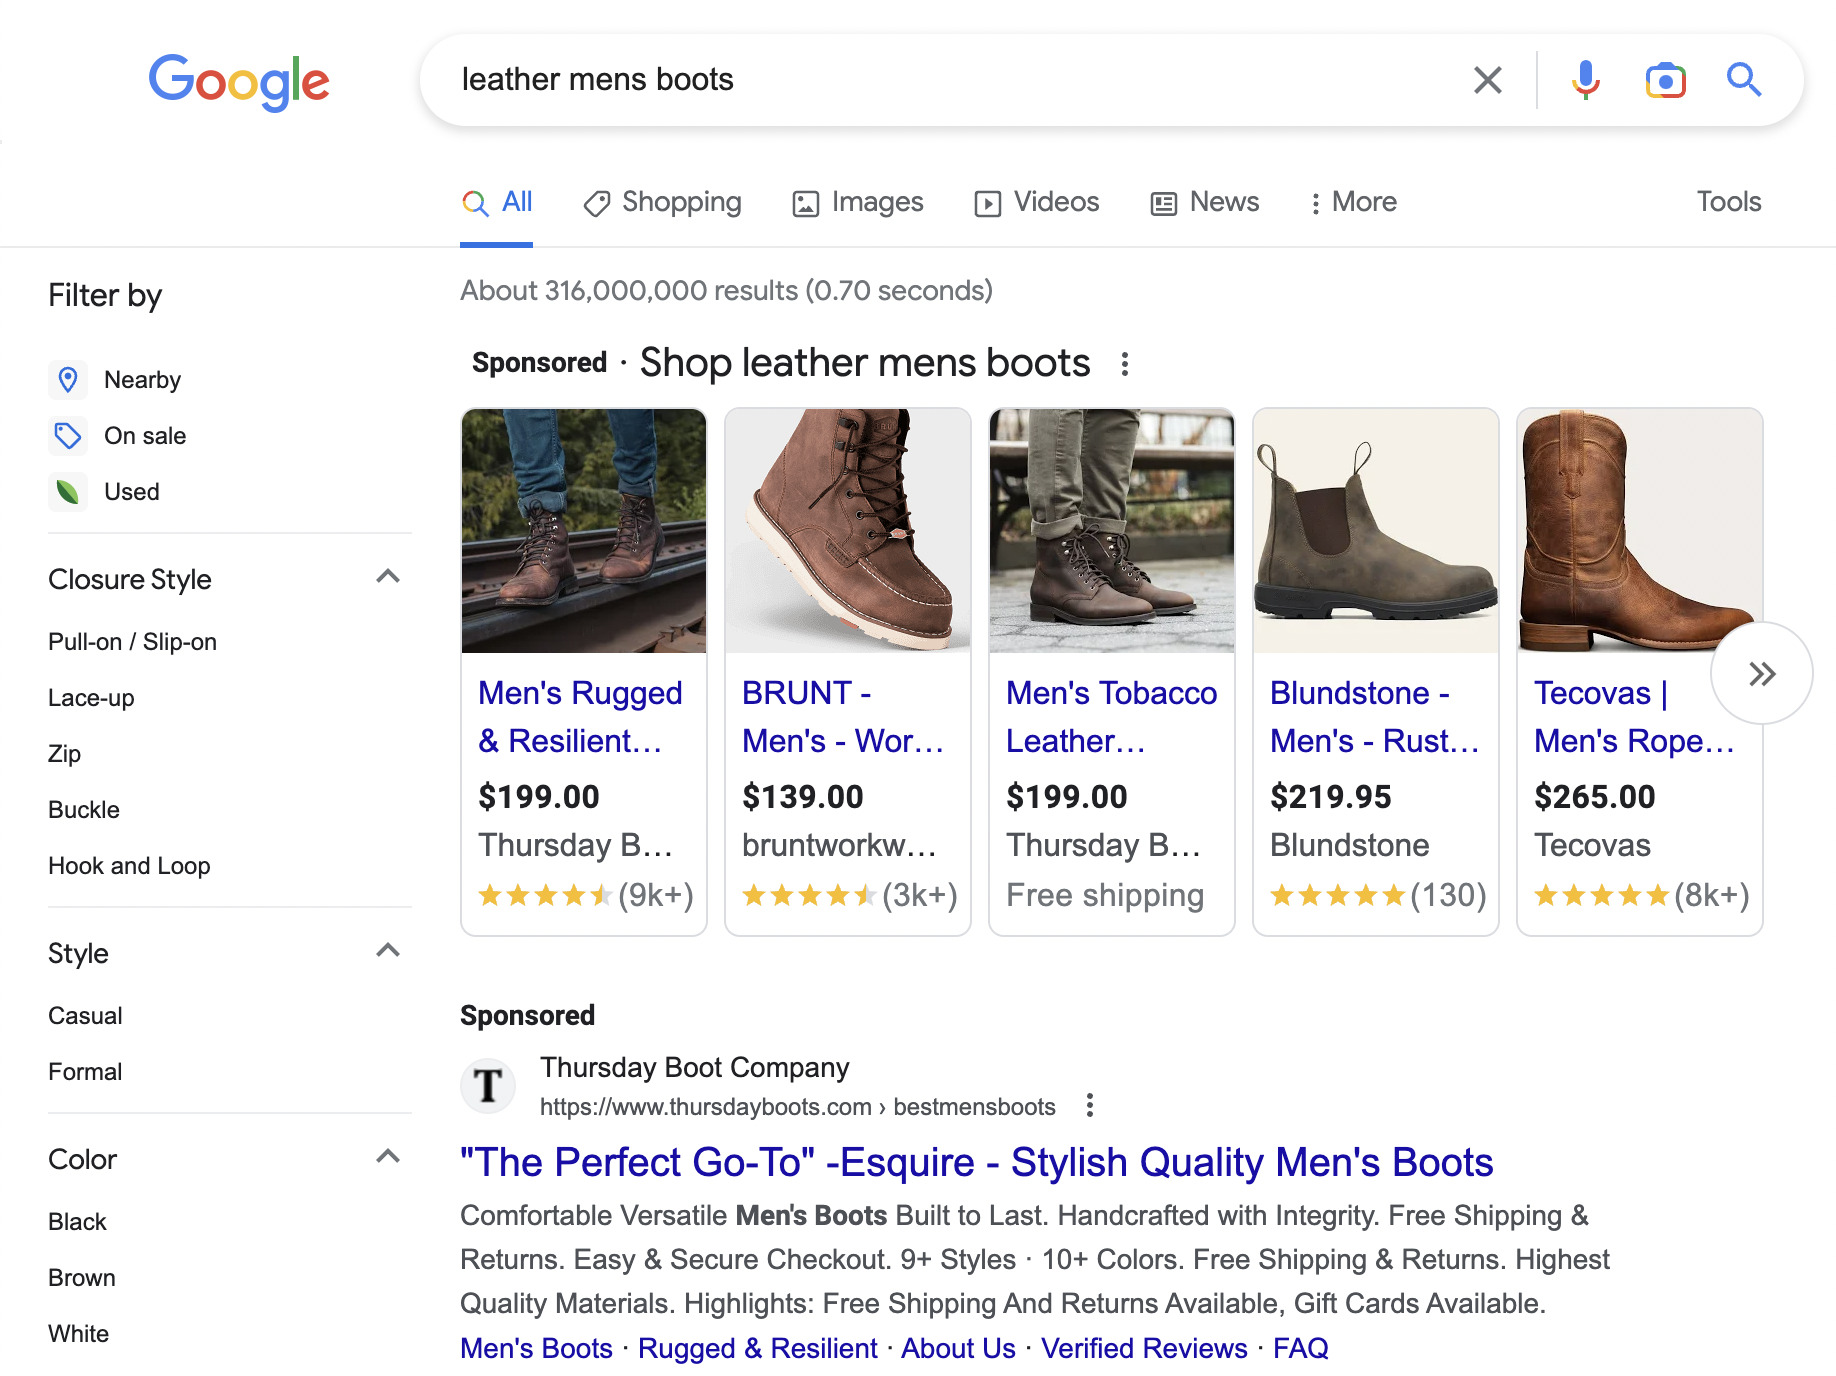 Google search results for "leather mens boots"